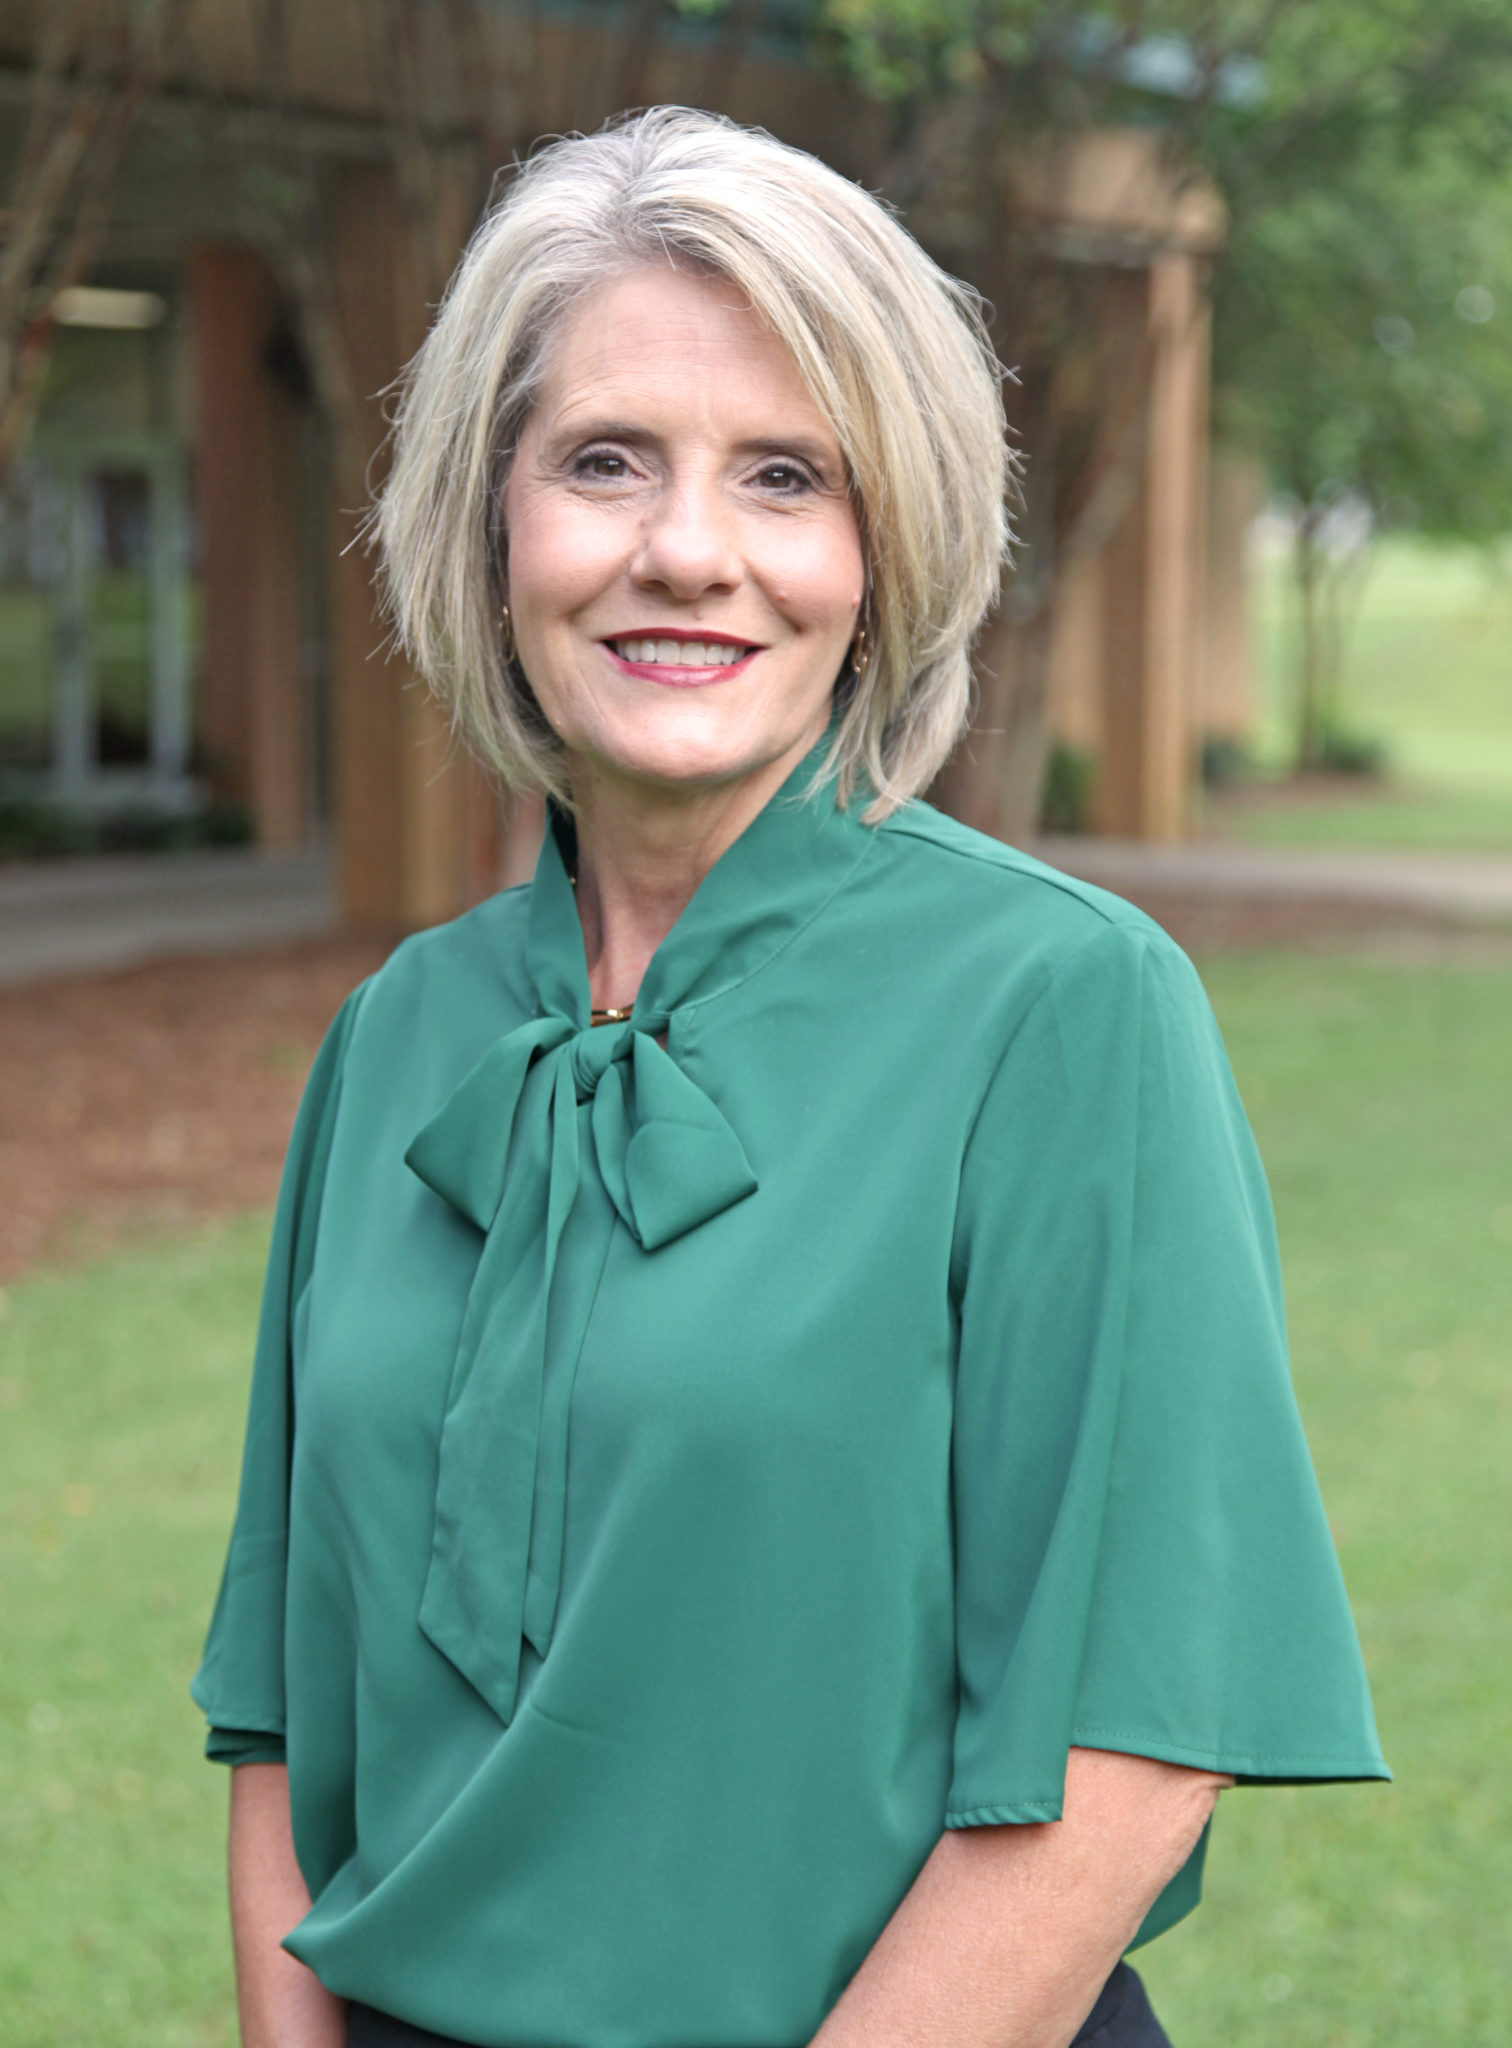 Stump named new Dean of Administrative Services